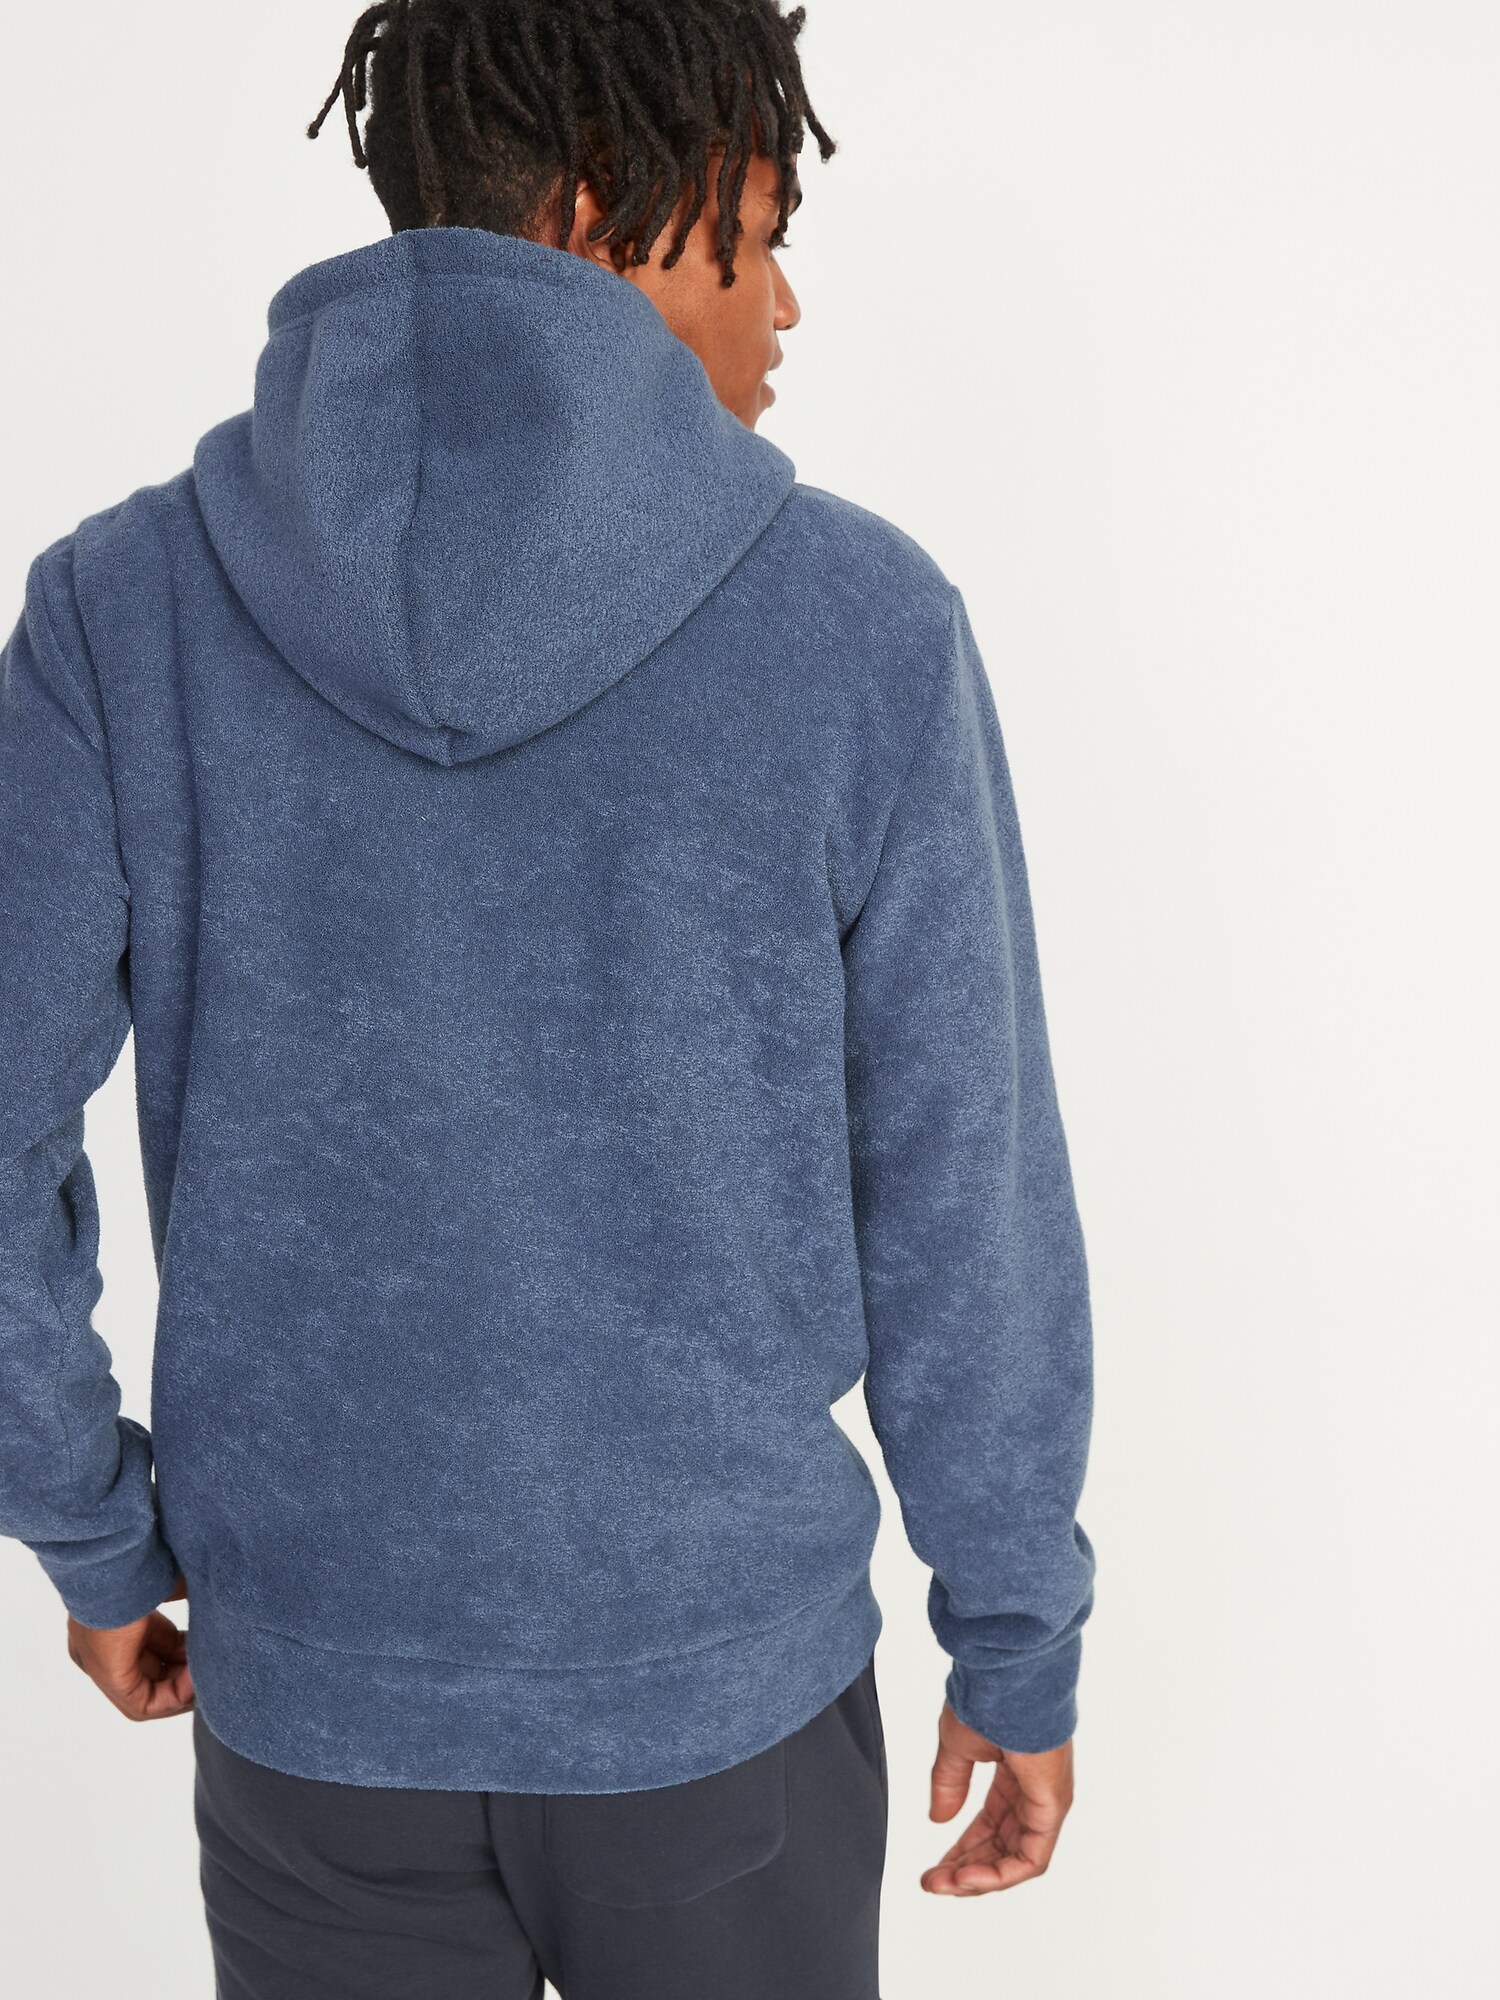 Cozy Sweater Pullover Hoodie for Men, Old Navy